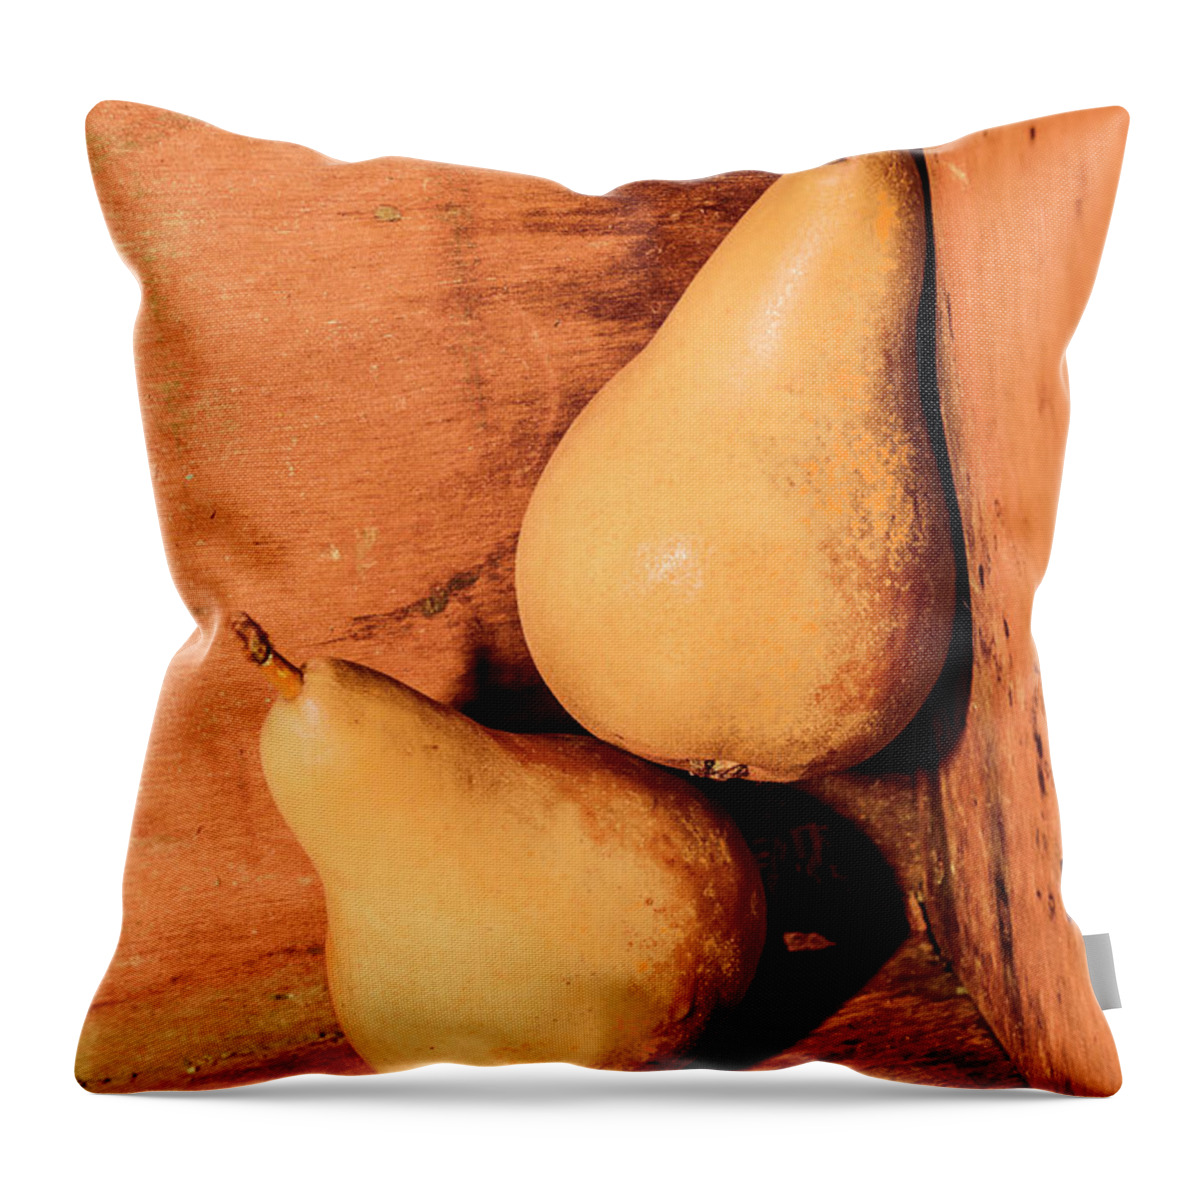 Pear Throw Pillow featuring the photograph Yellow colored pears on wooden background by Jorgo Photography